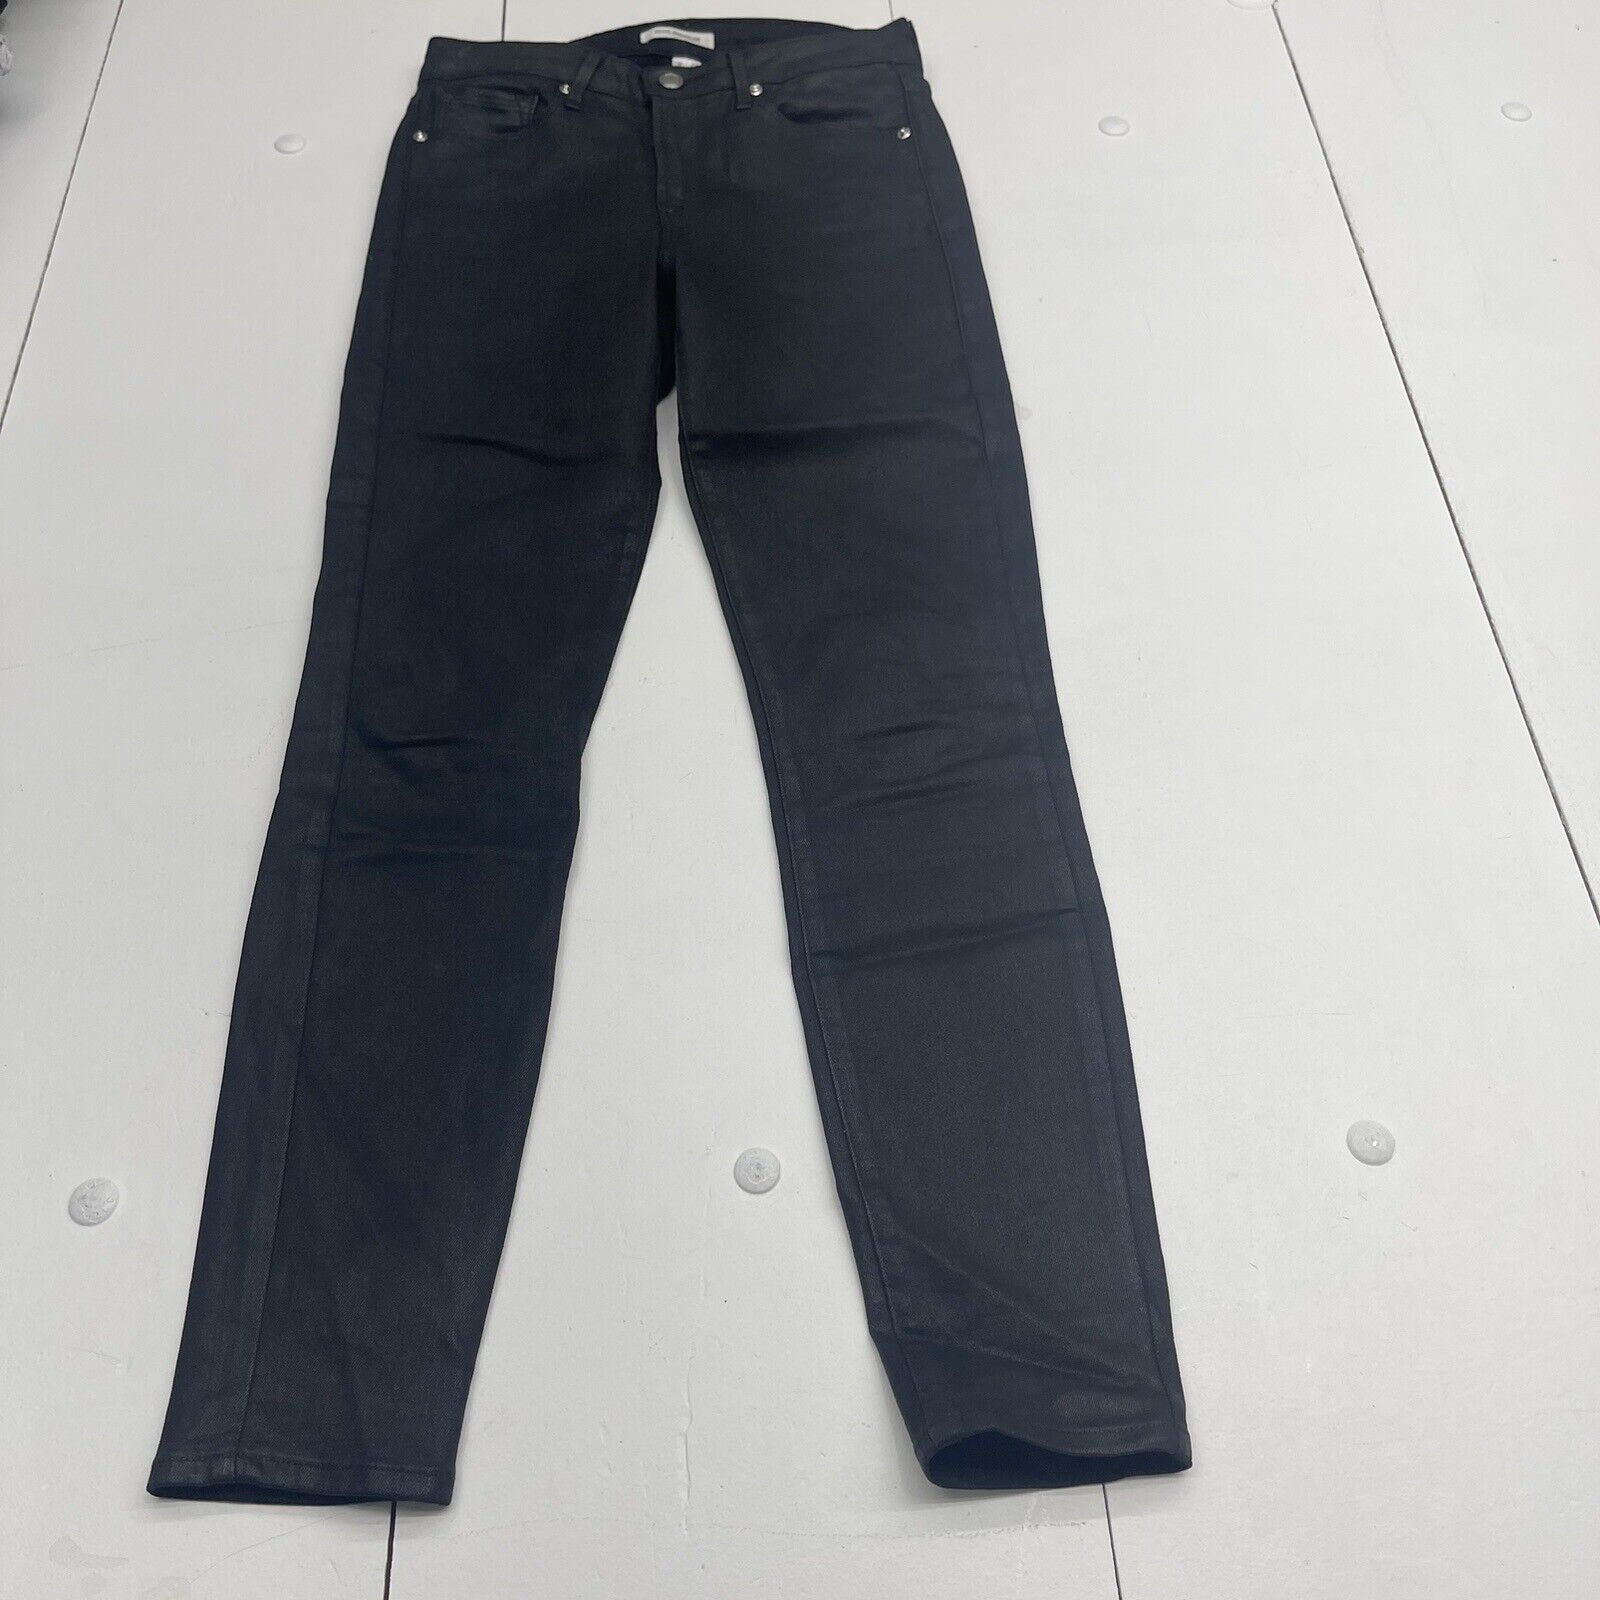 TYPE-2814 Men: Coated jeans with shiny finish | Diesel Black Gold